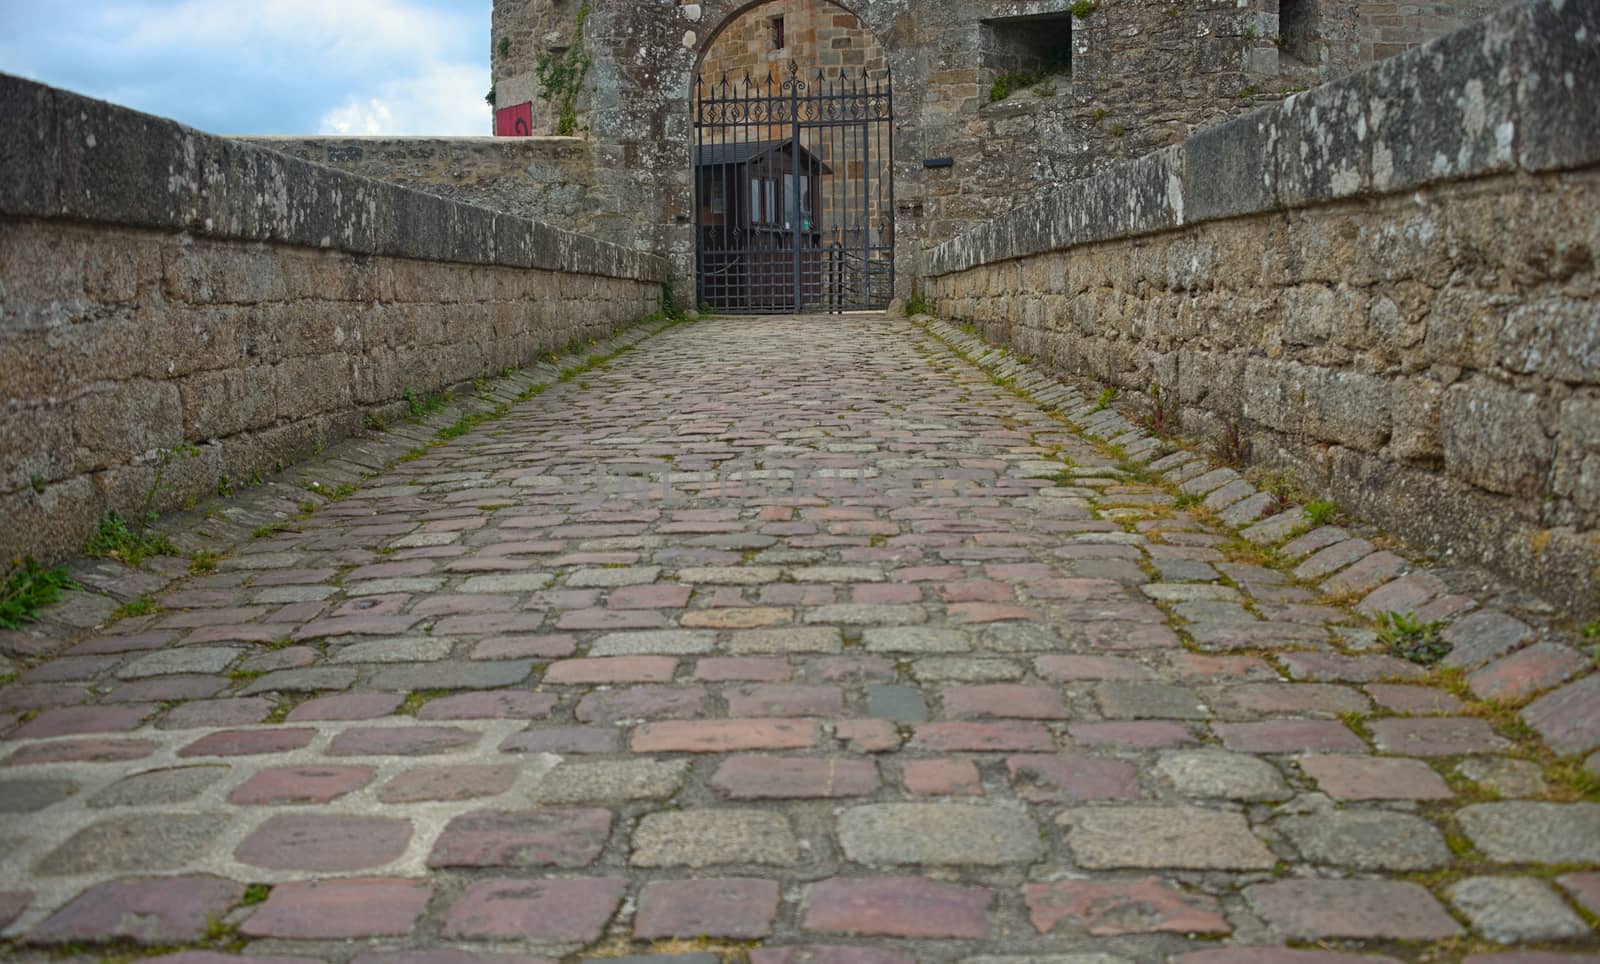 Stone pathway and gate into a fortress at Dinan, France by sheriffkule